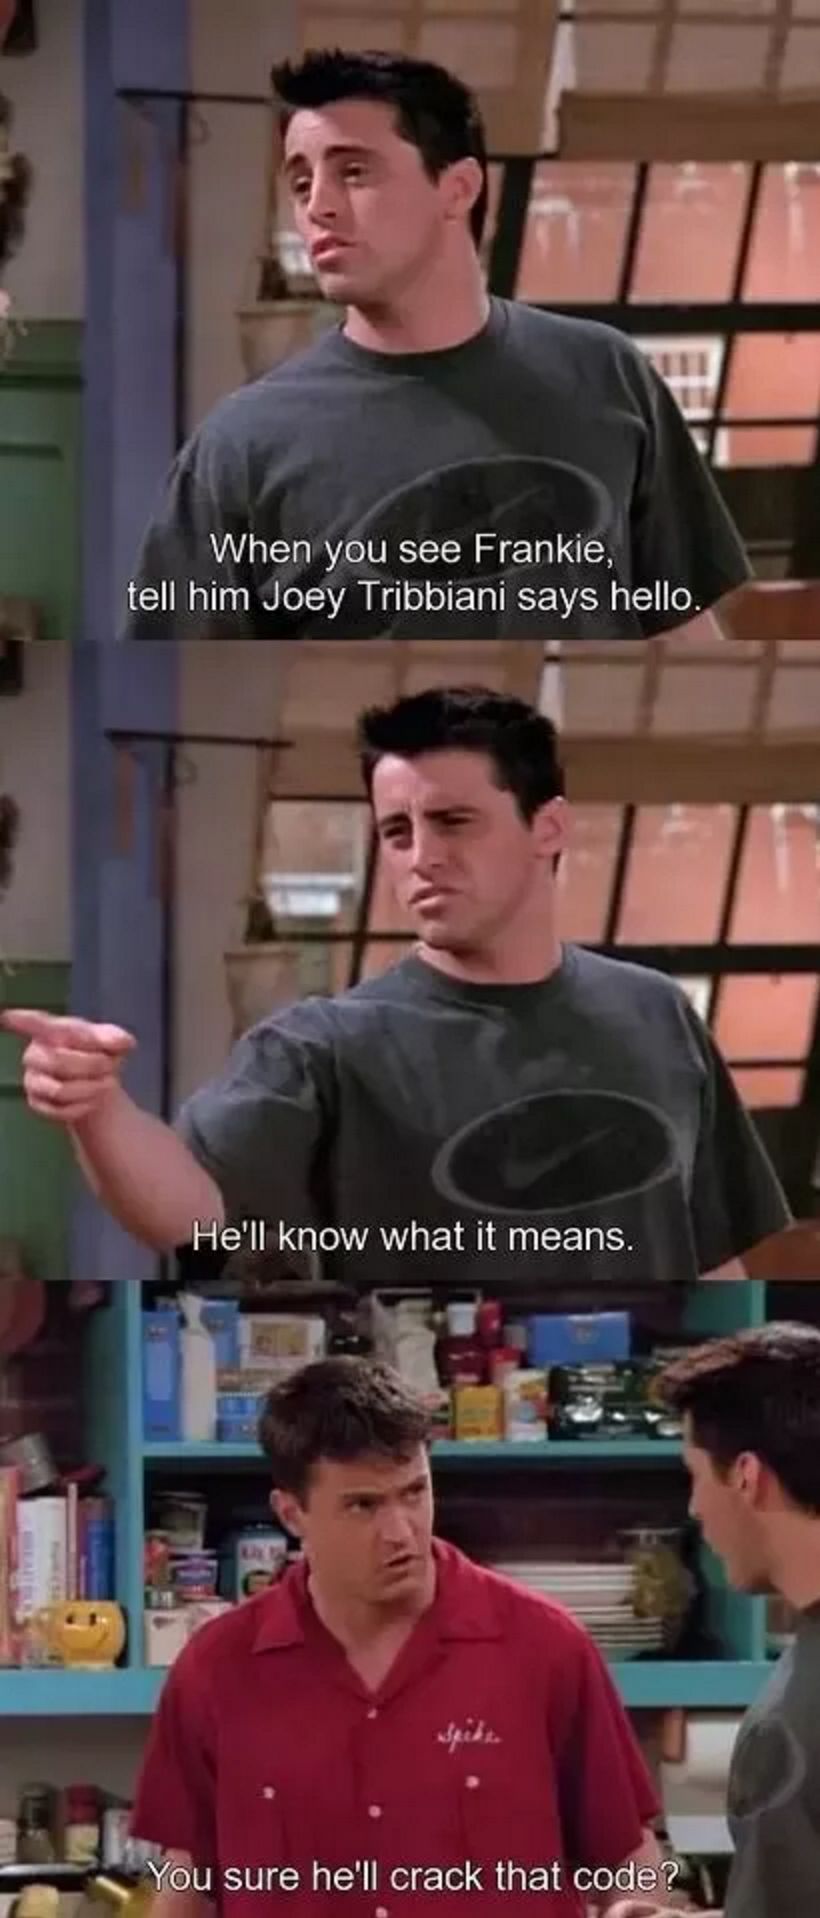 The All-Time Best Chandler Bing One-Liners | HuffPost Entertainment